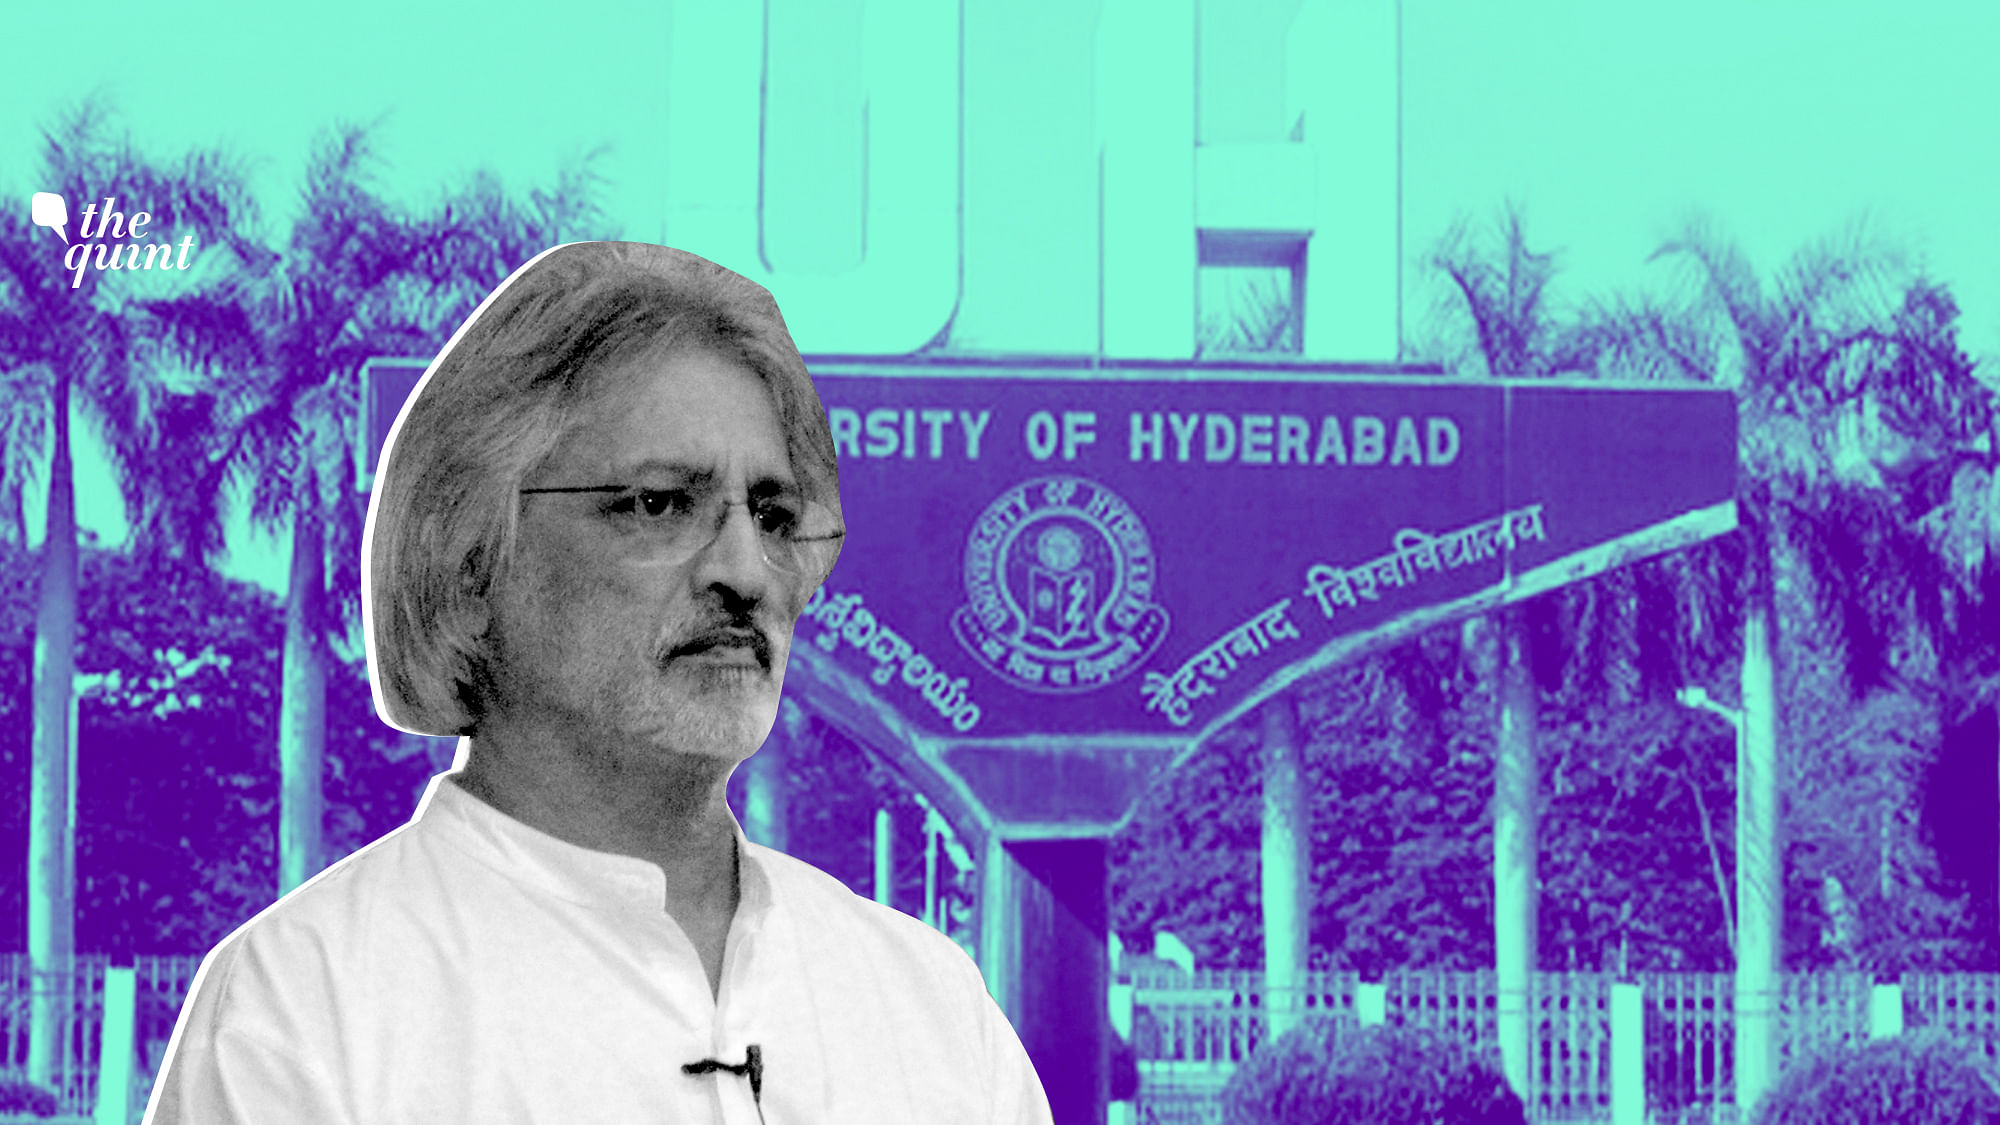 The screening of Anand Patwardhan’s film ‘Ram ke Naam’ was barred at the Hyderabad University campus on Tuesday.